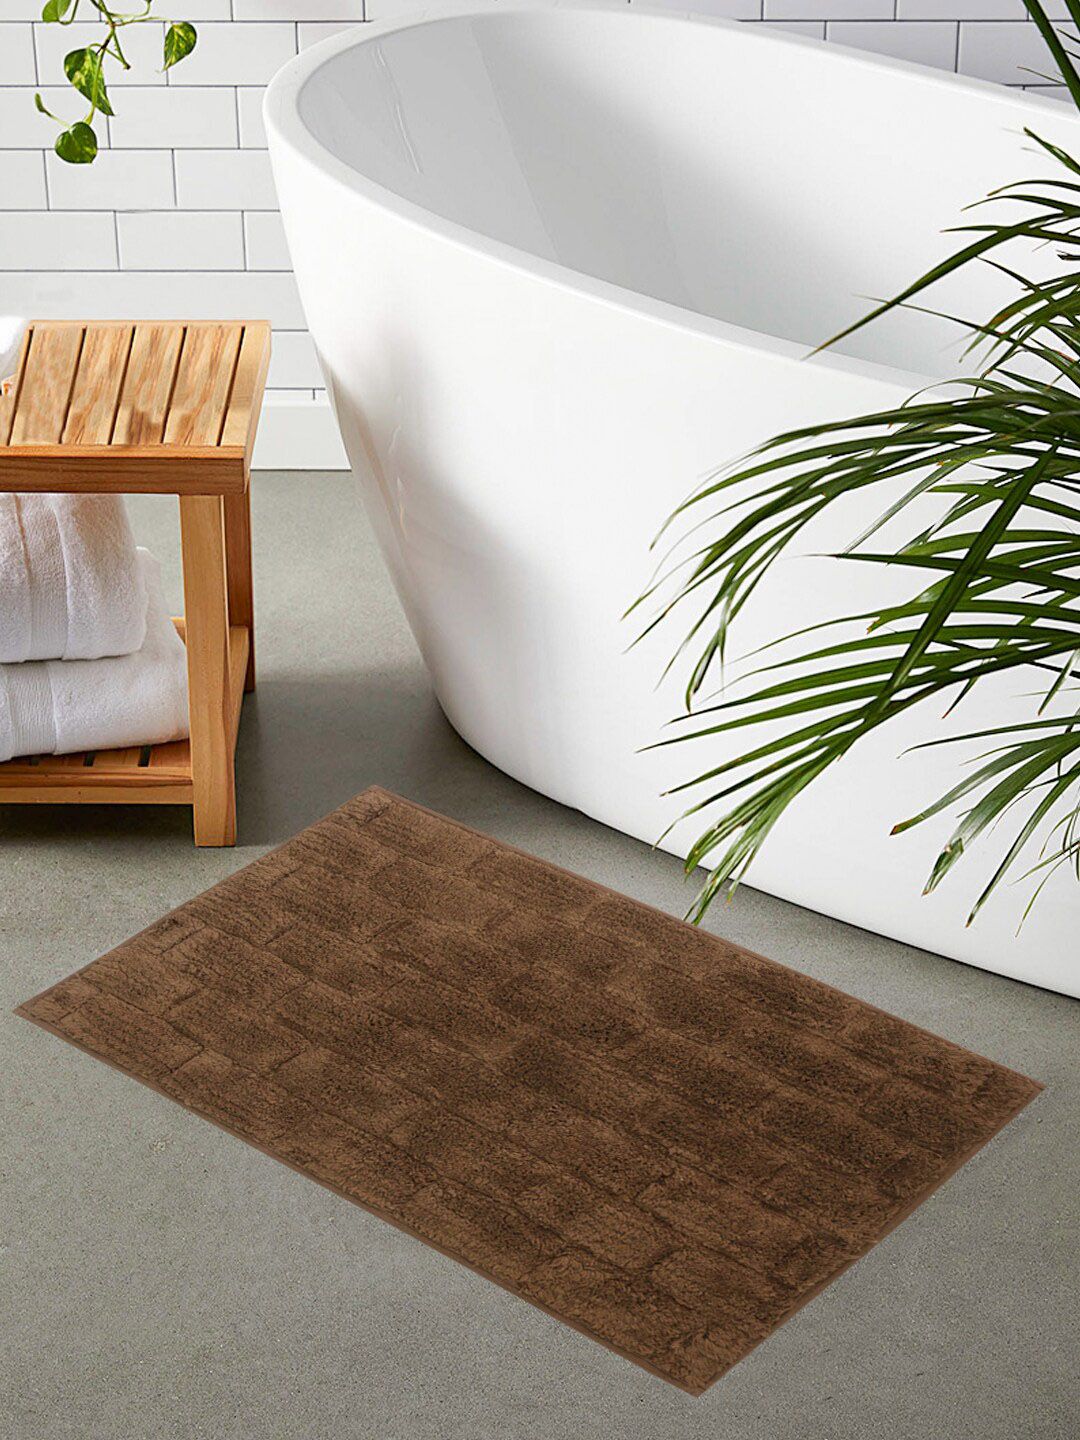 Shresmo Bronze 2200 GSM Solid Bath Rugs Price in India